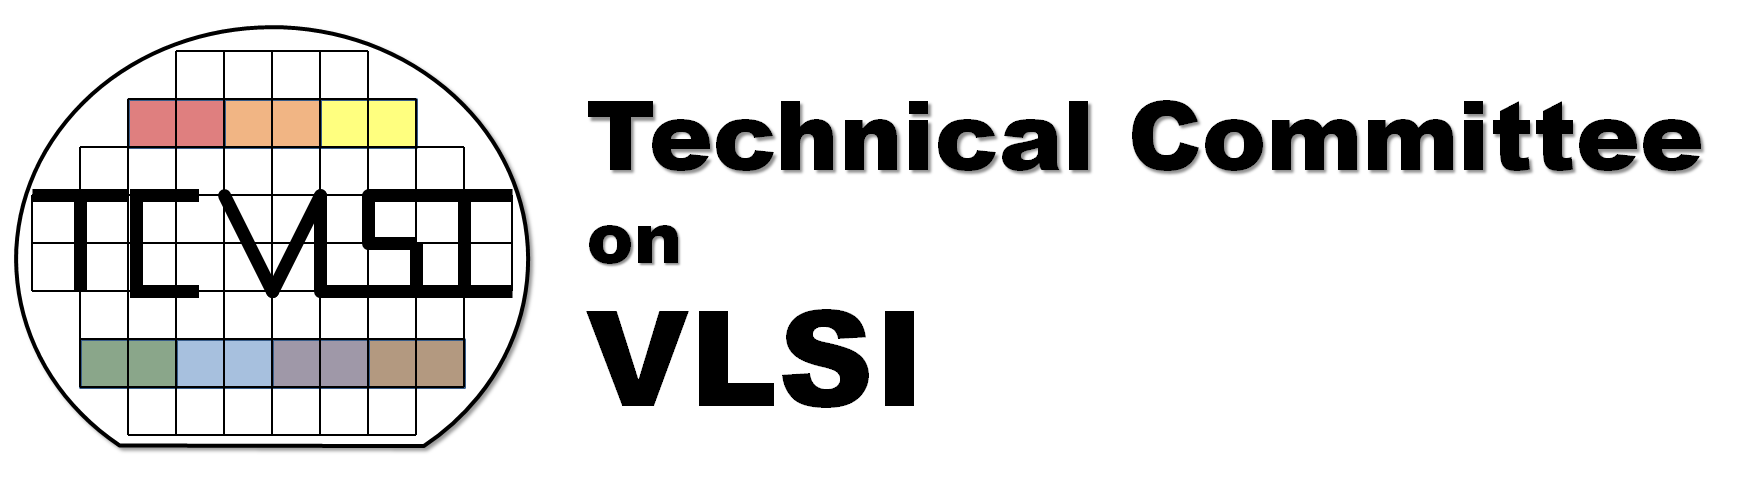 Technical Committee on VLSI